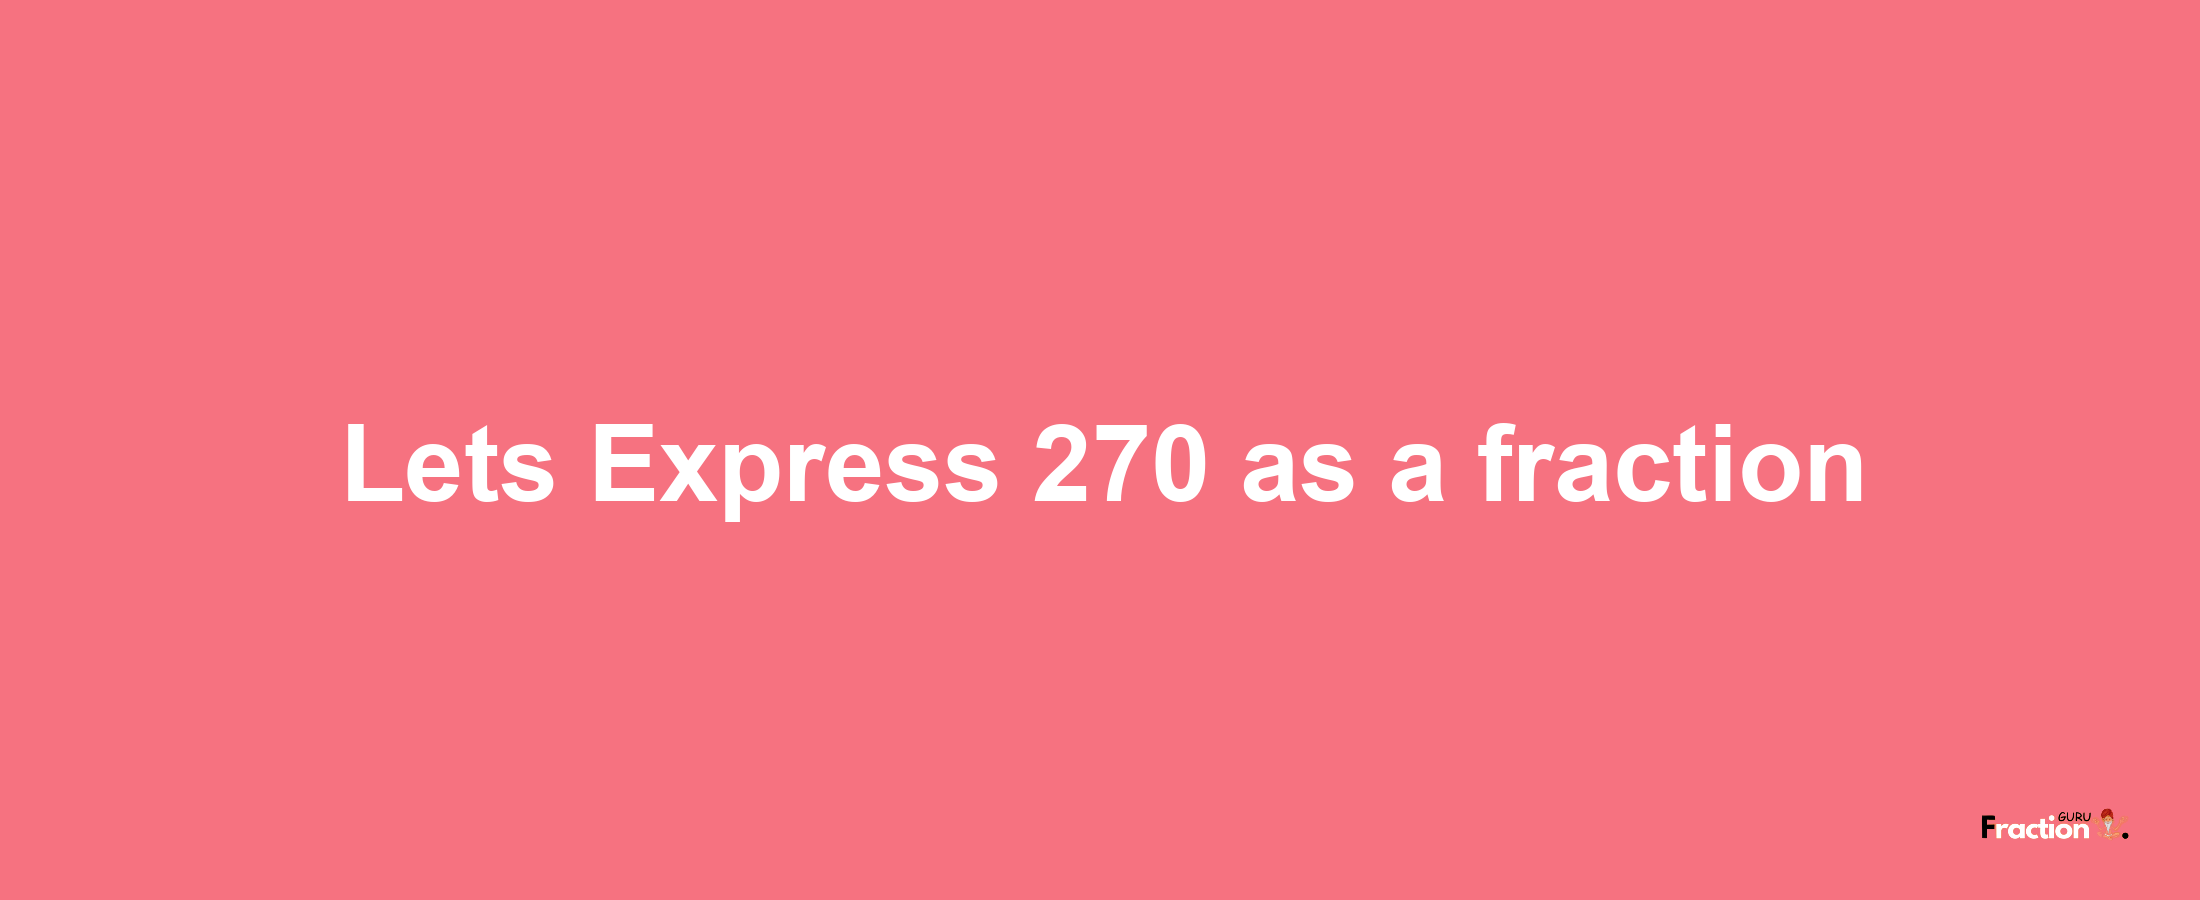 Lets Express 270 as afraction